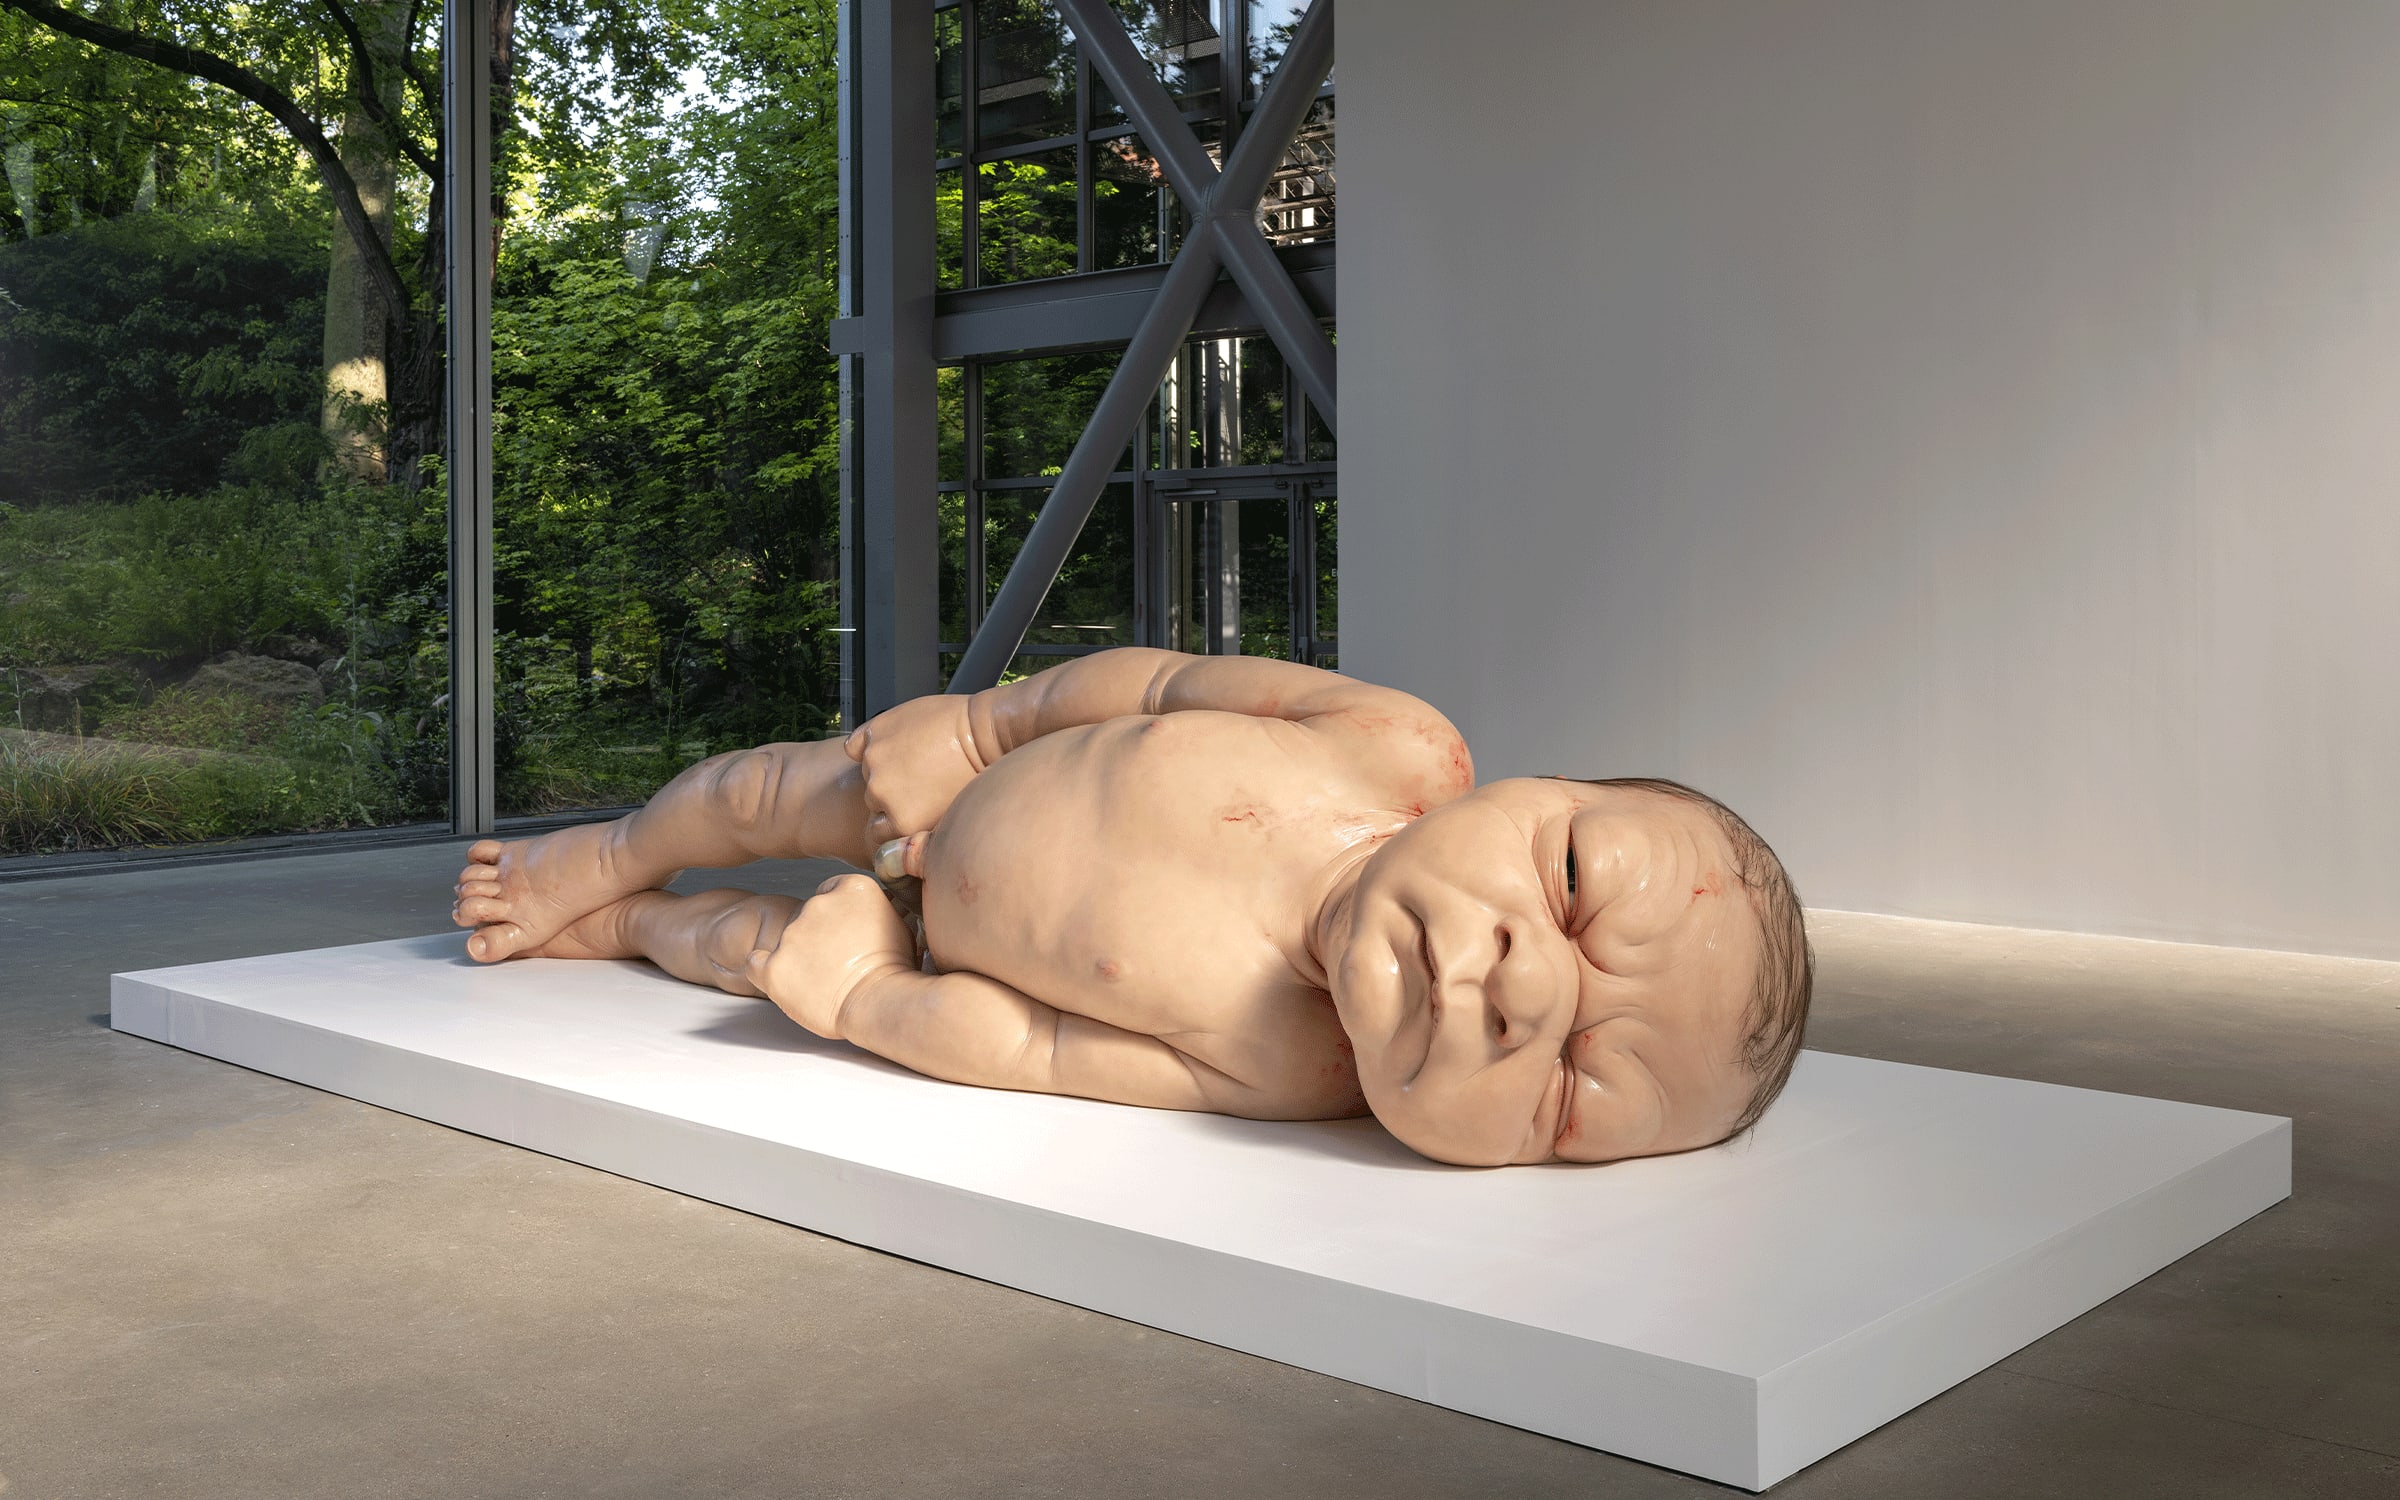 Ron Mueck, A Girl, 2006. Installation view from Ron Mueck’s solo show at the Fondation Cartier, Paris, 2023. Scottish National Gallery of Modern Art, Edinburgh. Acquired thanks to the support of the Art Fund, 2007. © Marc Domage